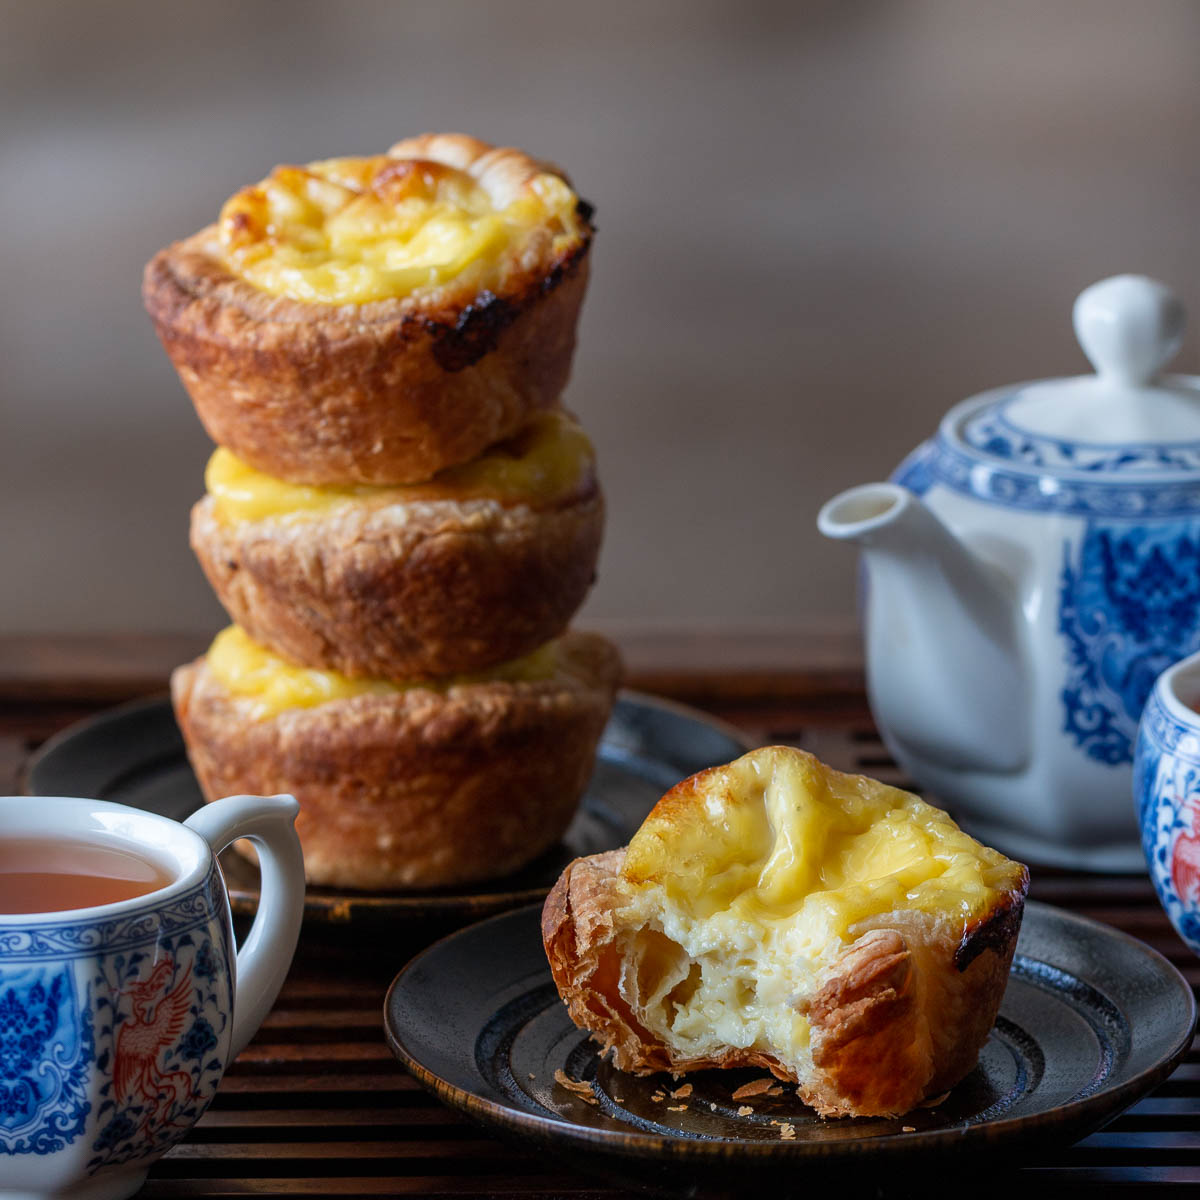 Hong Kong egg tarts stacked on top of each other with a blue tea pot and tea cups.